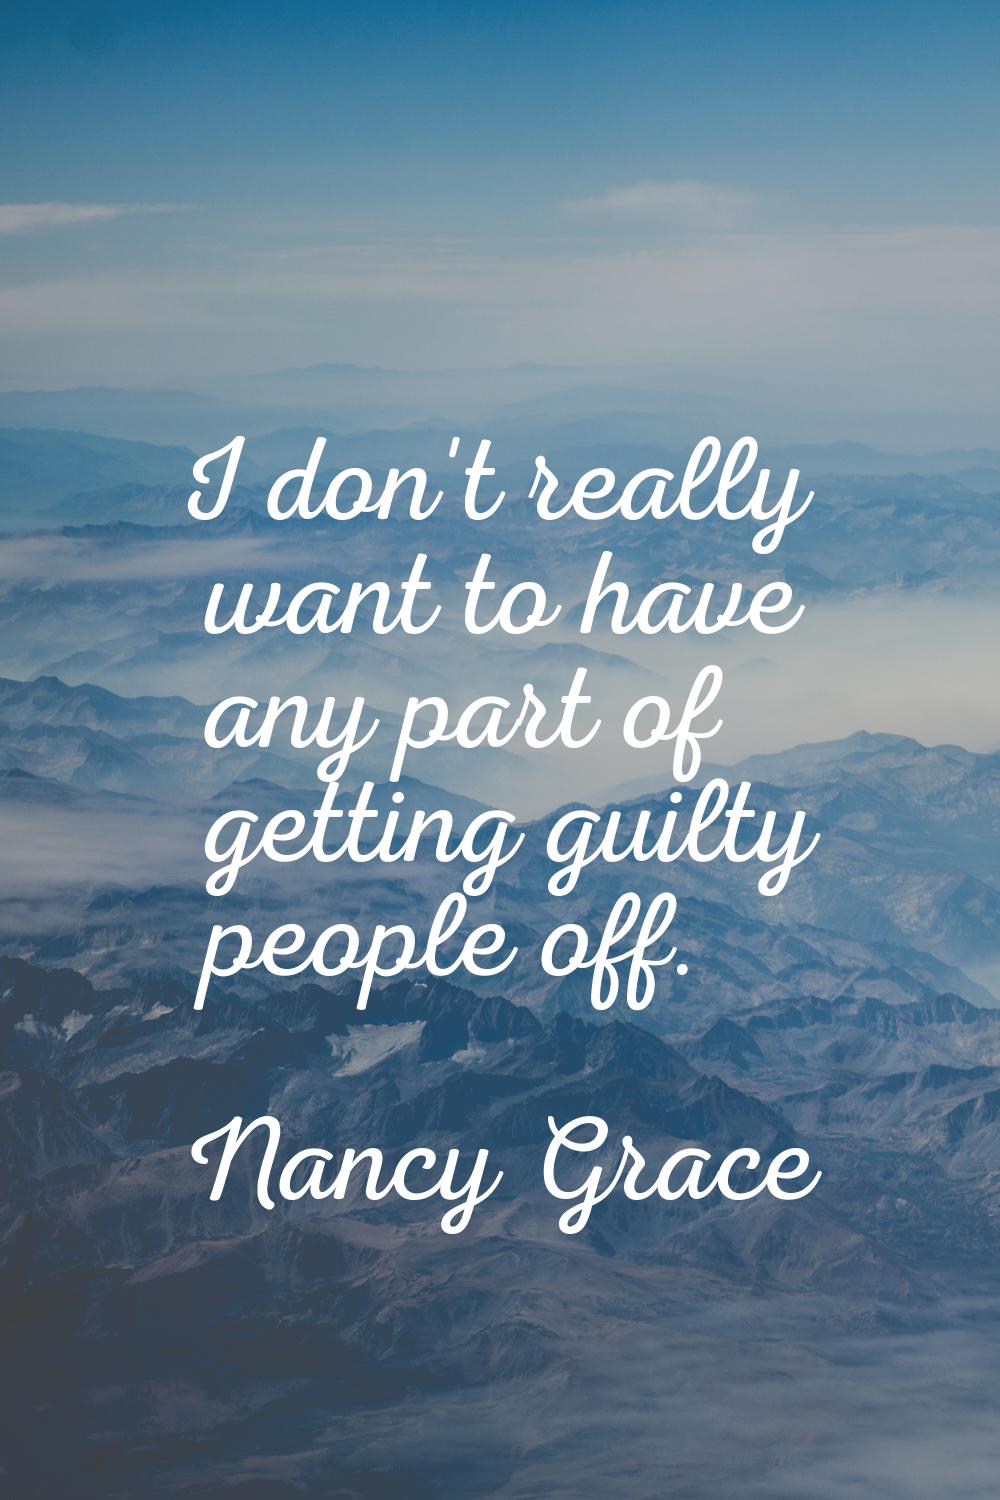 I don't really want to have any part of getting guilty people off.